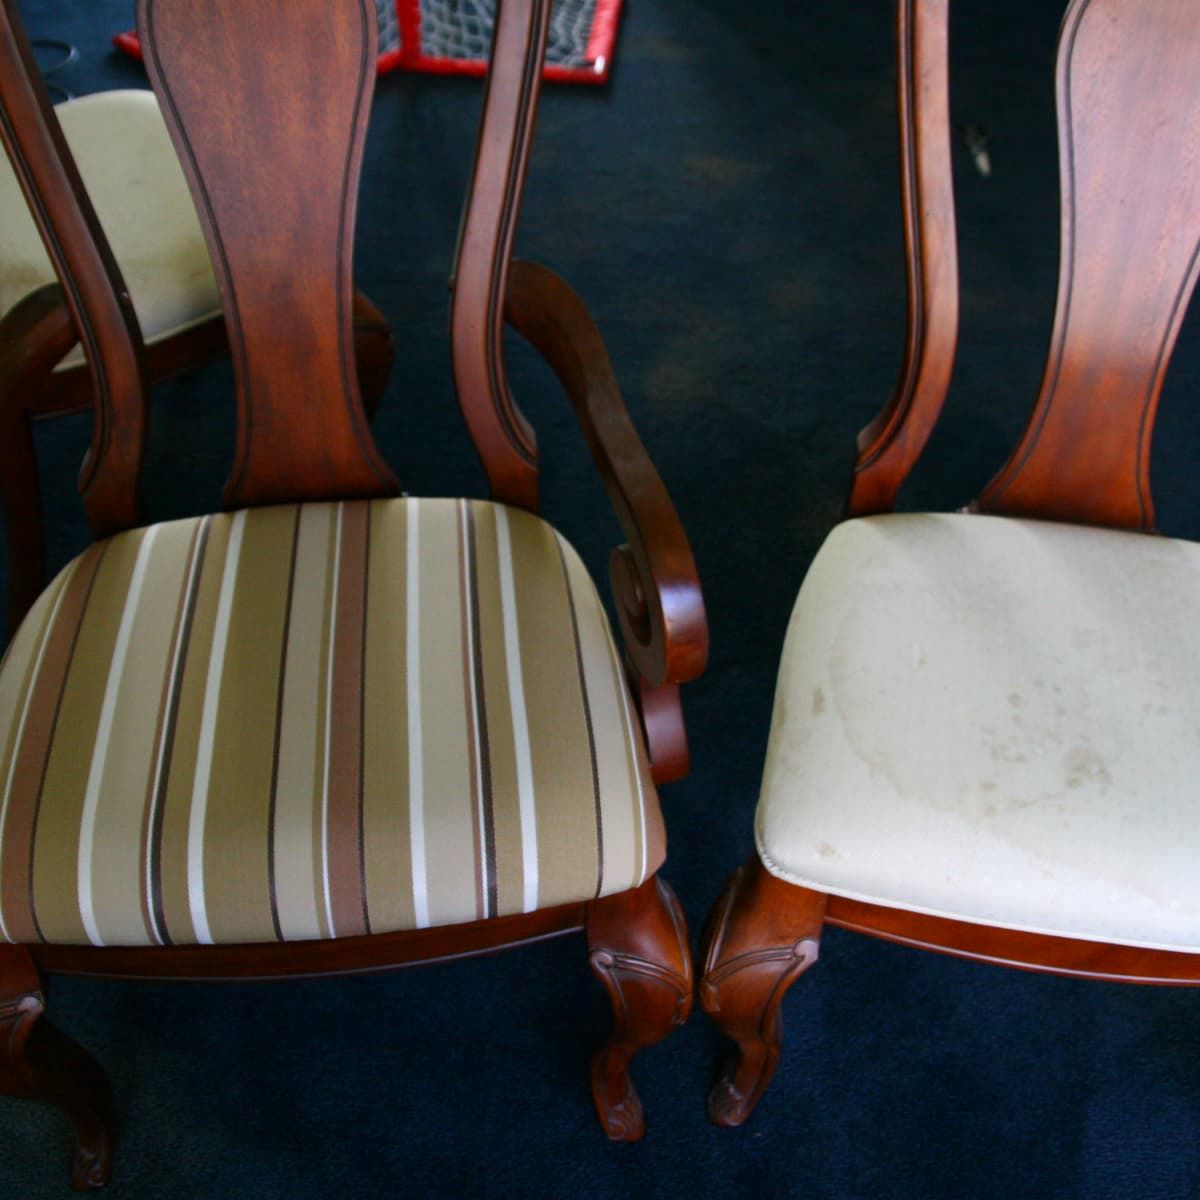 https://storables.com/wp-content/uploads/2023/09/how-much-does-it-cost-to-reupholster-dining-room-chairs-1695786432.jpg